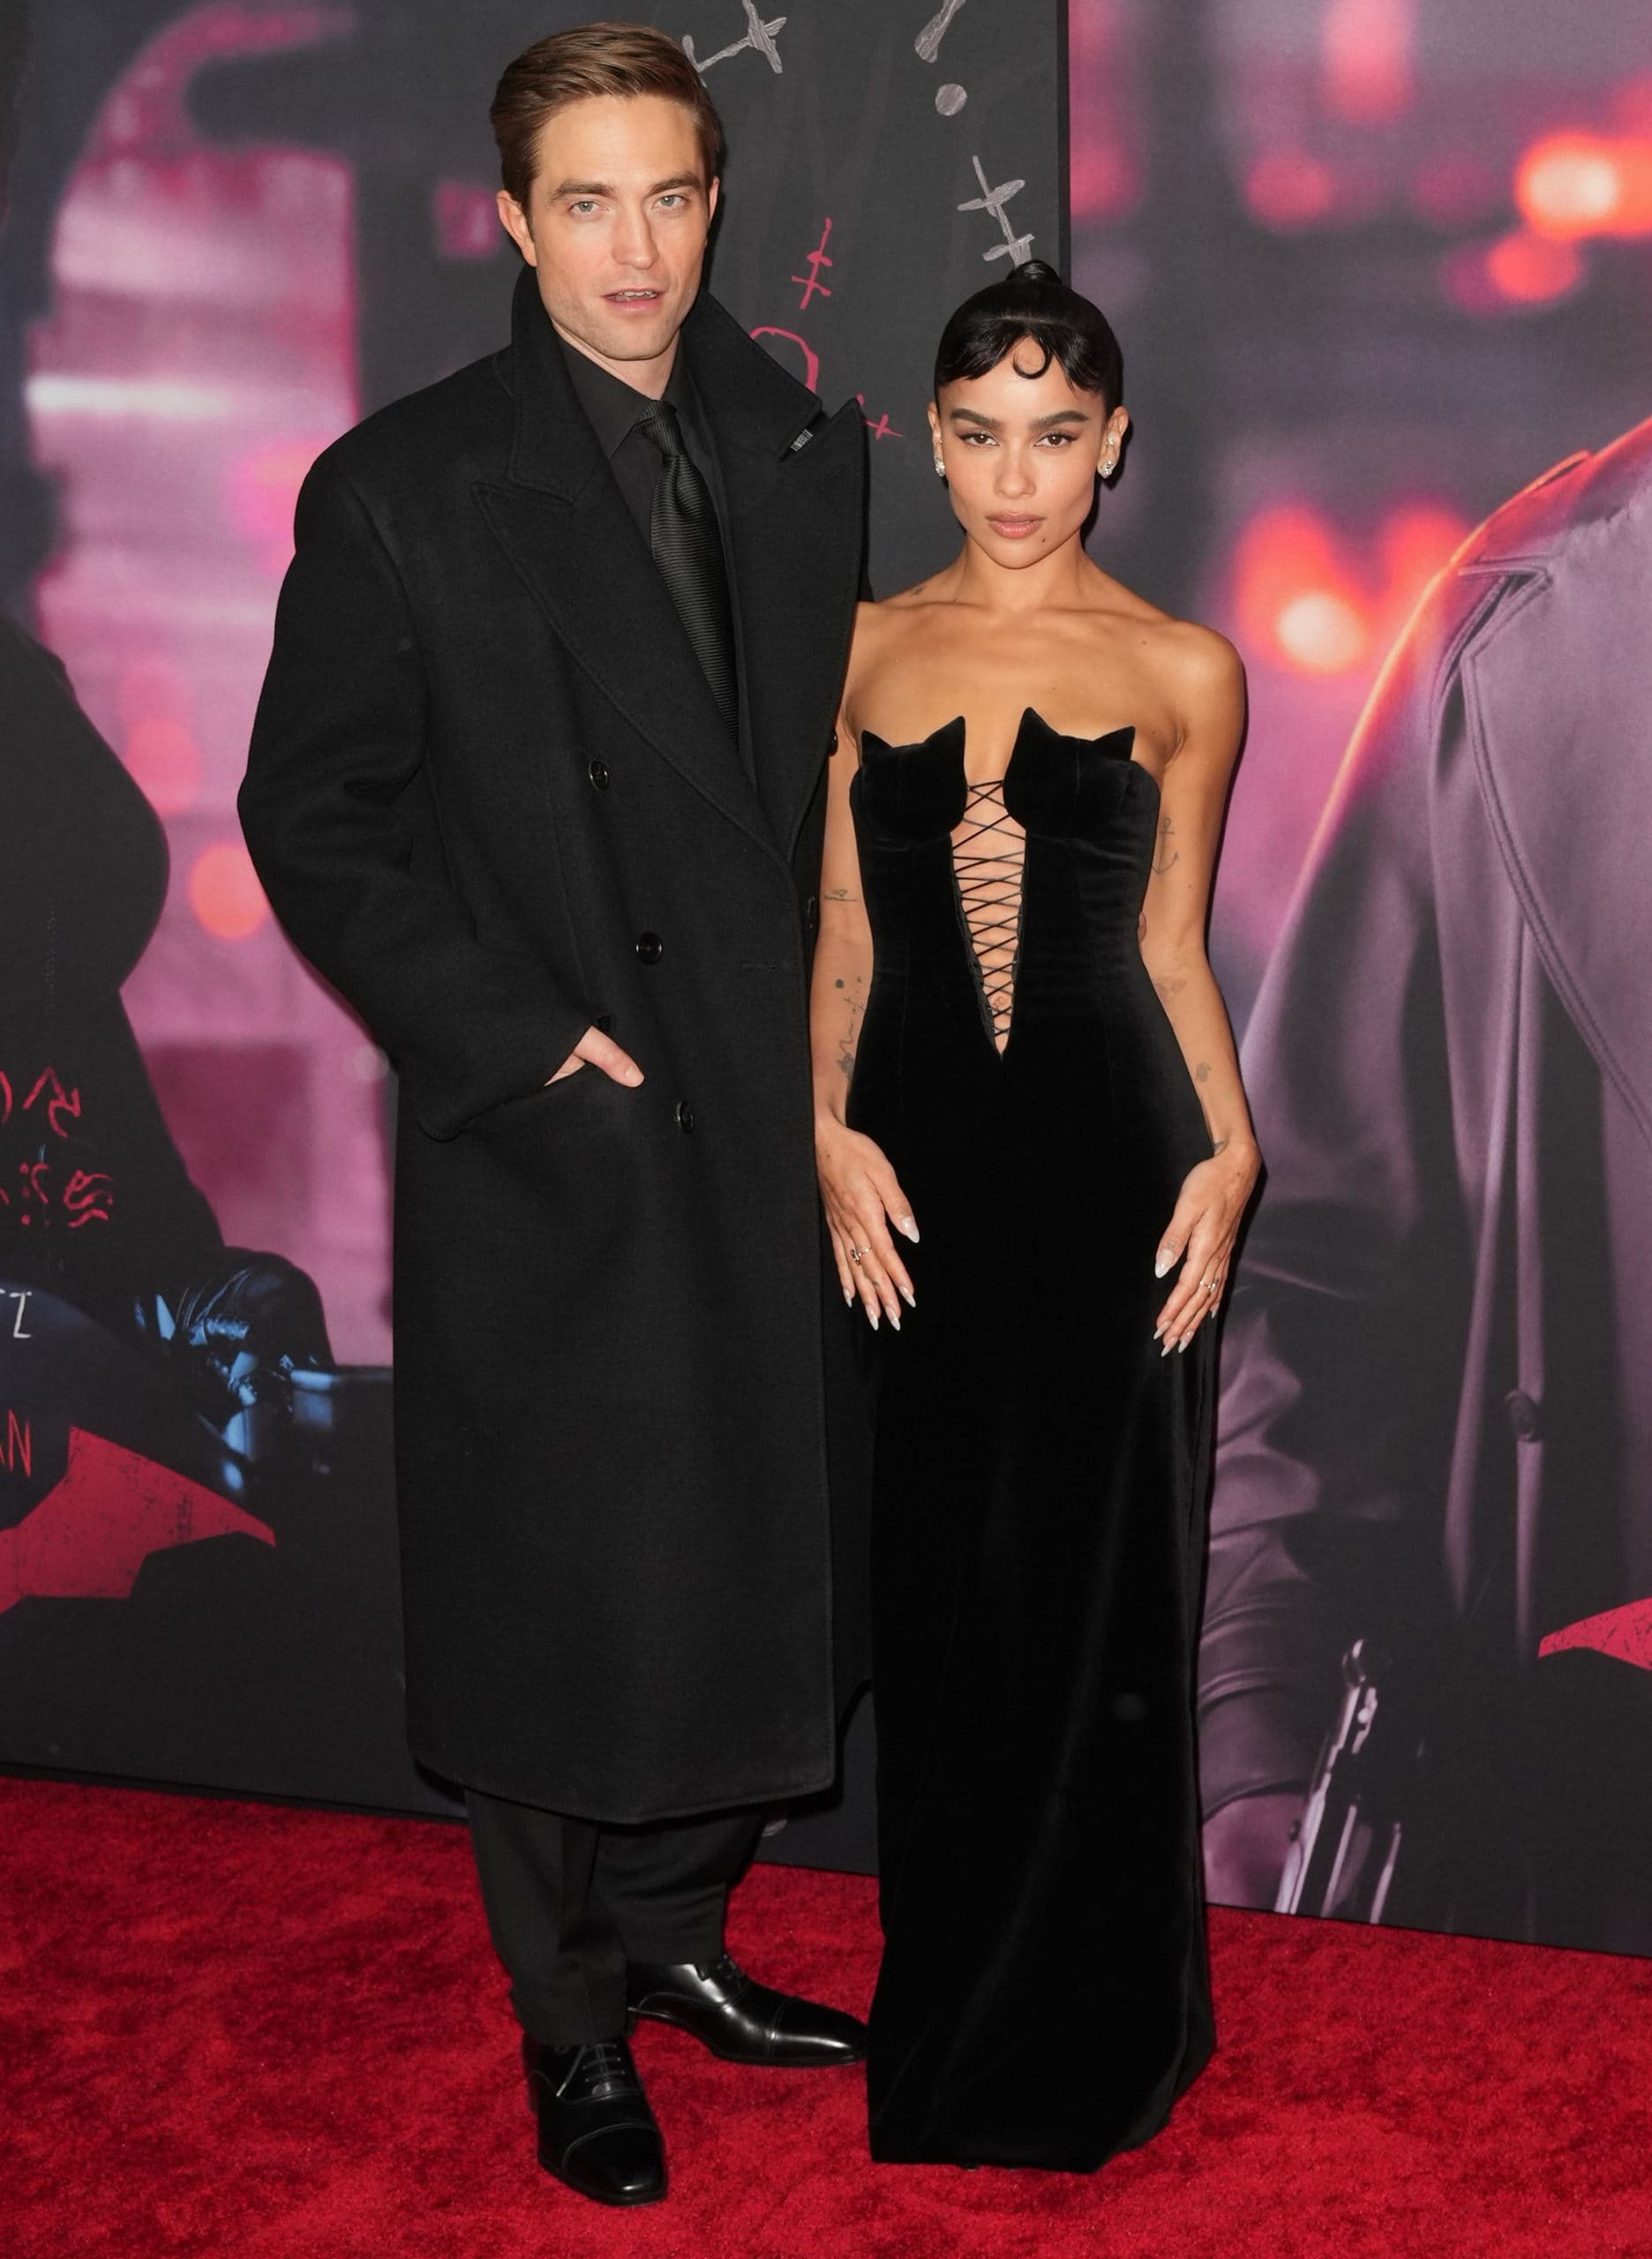 Zoë Kravitz in a Catwoman-inspired dress with Robert Pattinson at "The Batman" premiere